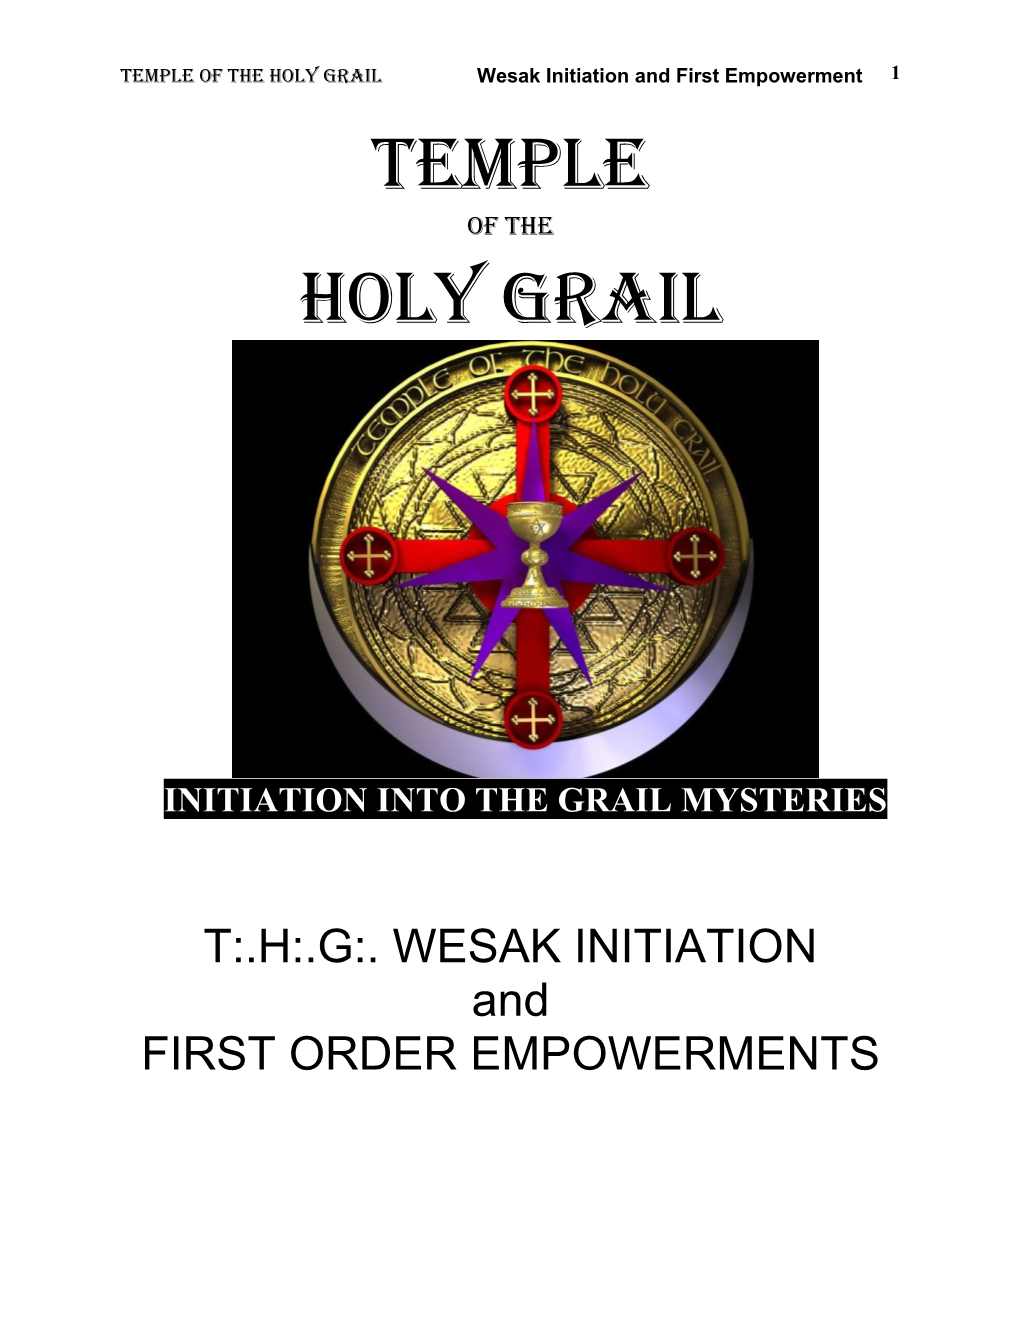 The Liturgy of the Holy Grail, Which Will Be Used for Initiation and All Empowerments